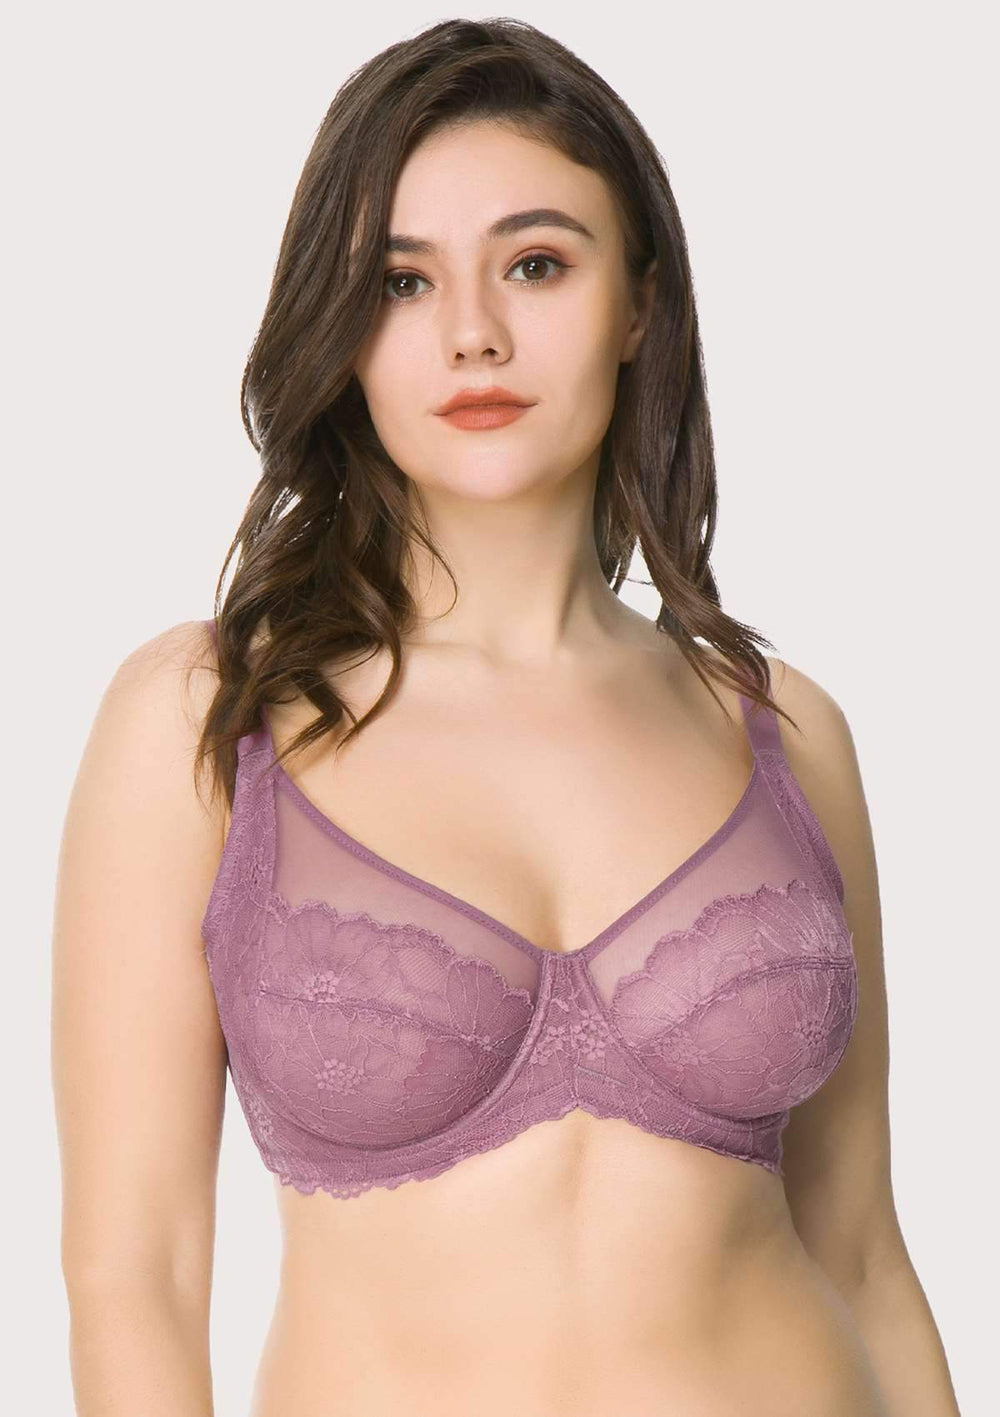 Women's Underwire Bra, Breathable Non Padded Plus Size Full Coverage  Minimizer Bras BG Cup (Color : Beige, Size : 38D)